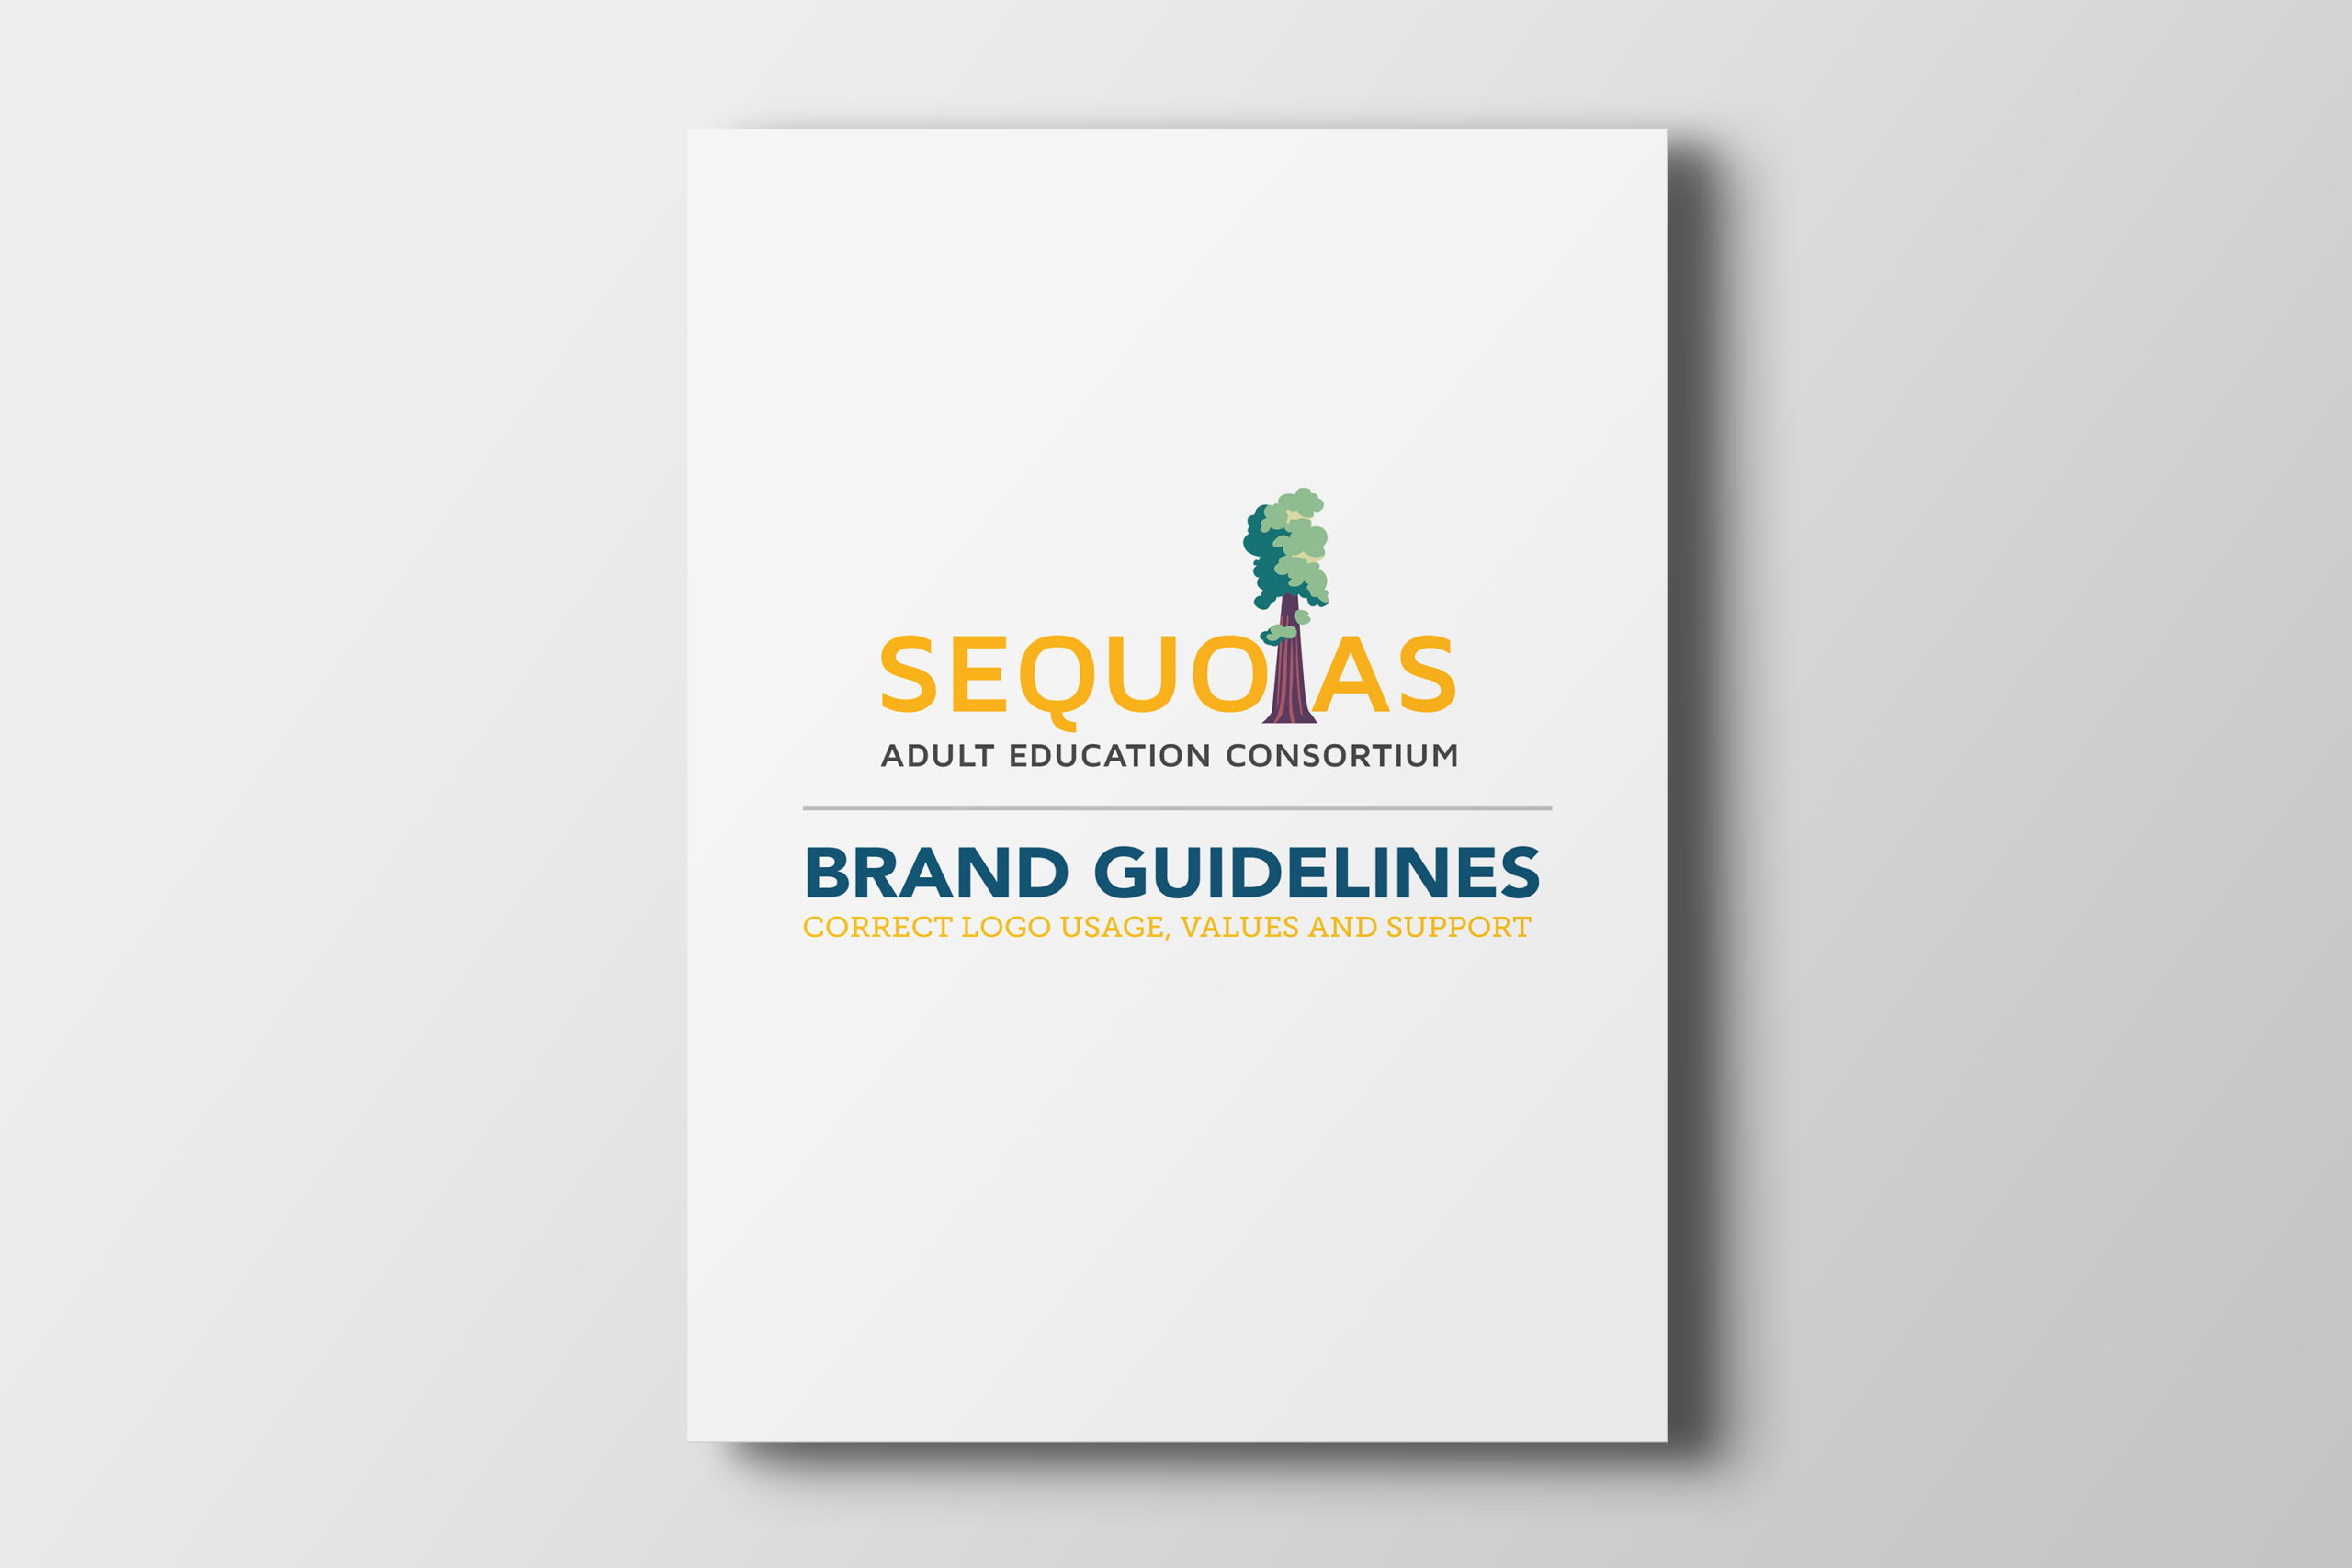 This is Sequoias brand guidelines